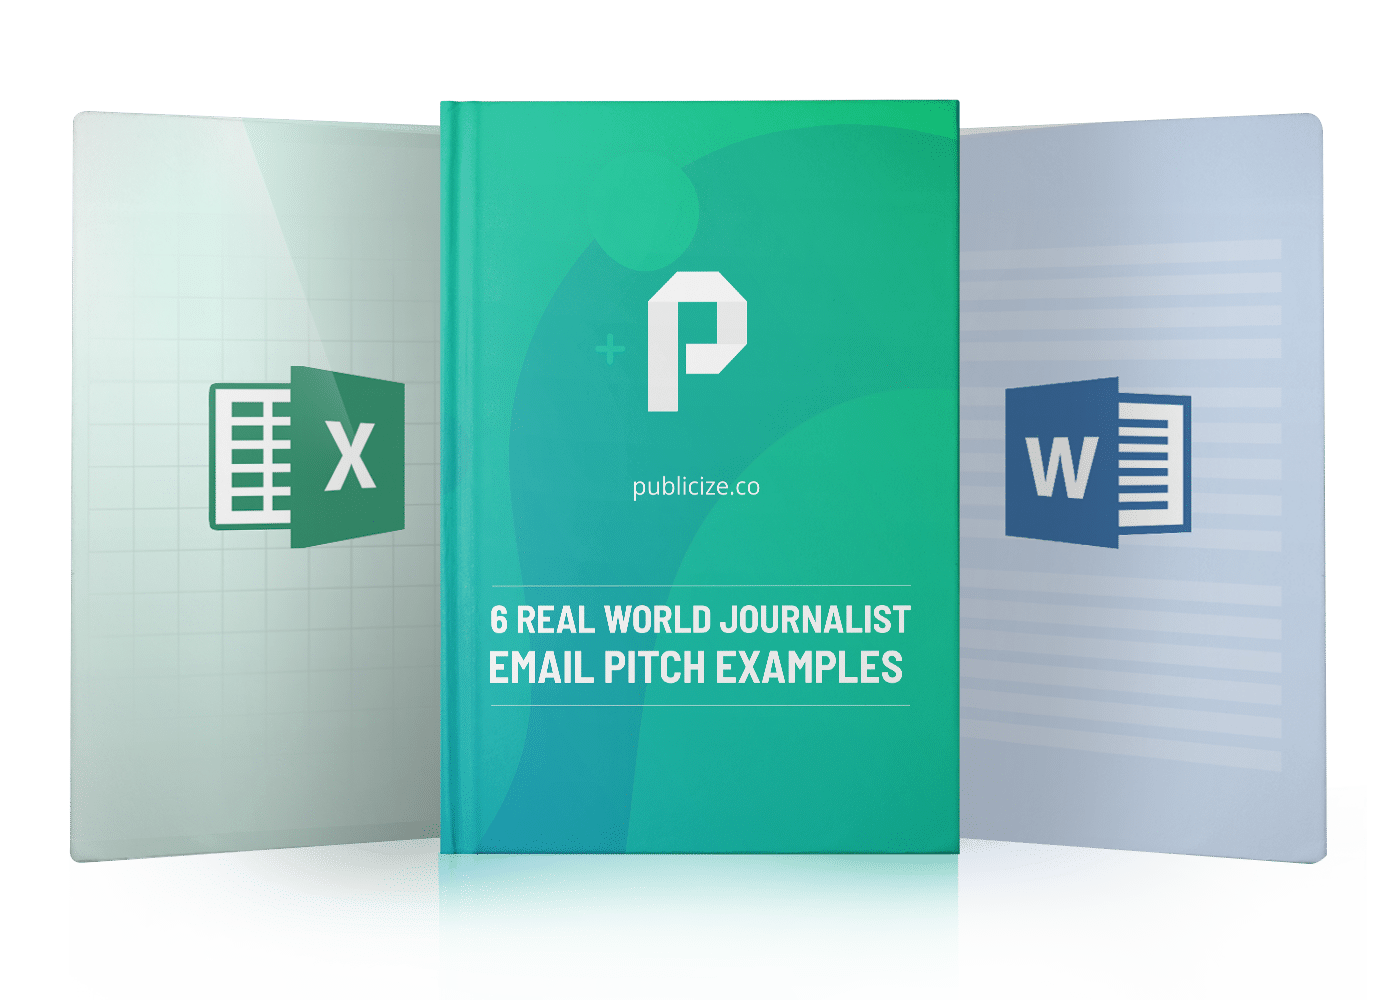 6 real world journalist email pitch examples book